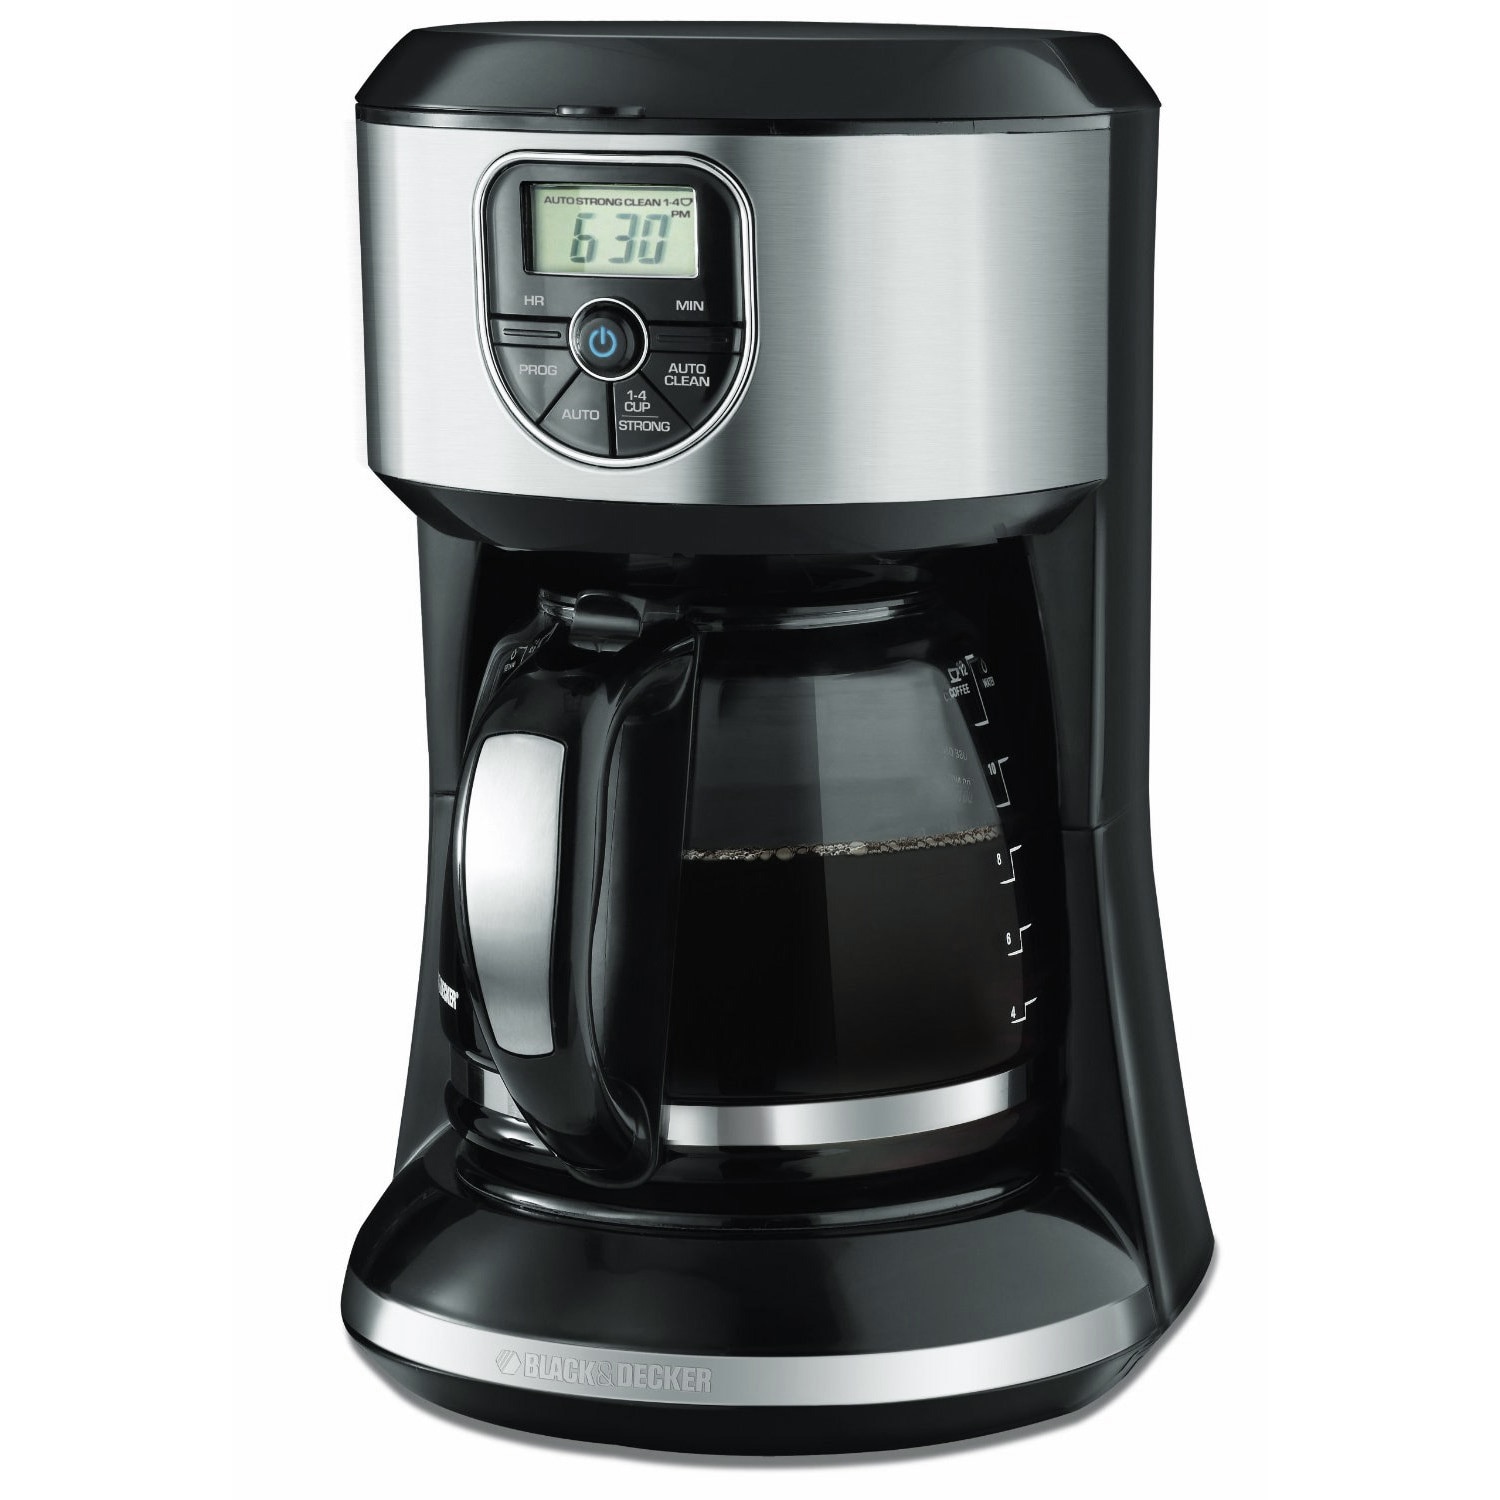 Save 53% On This Keurig Machine That Makes Hot and Iced Coffee